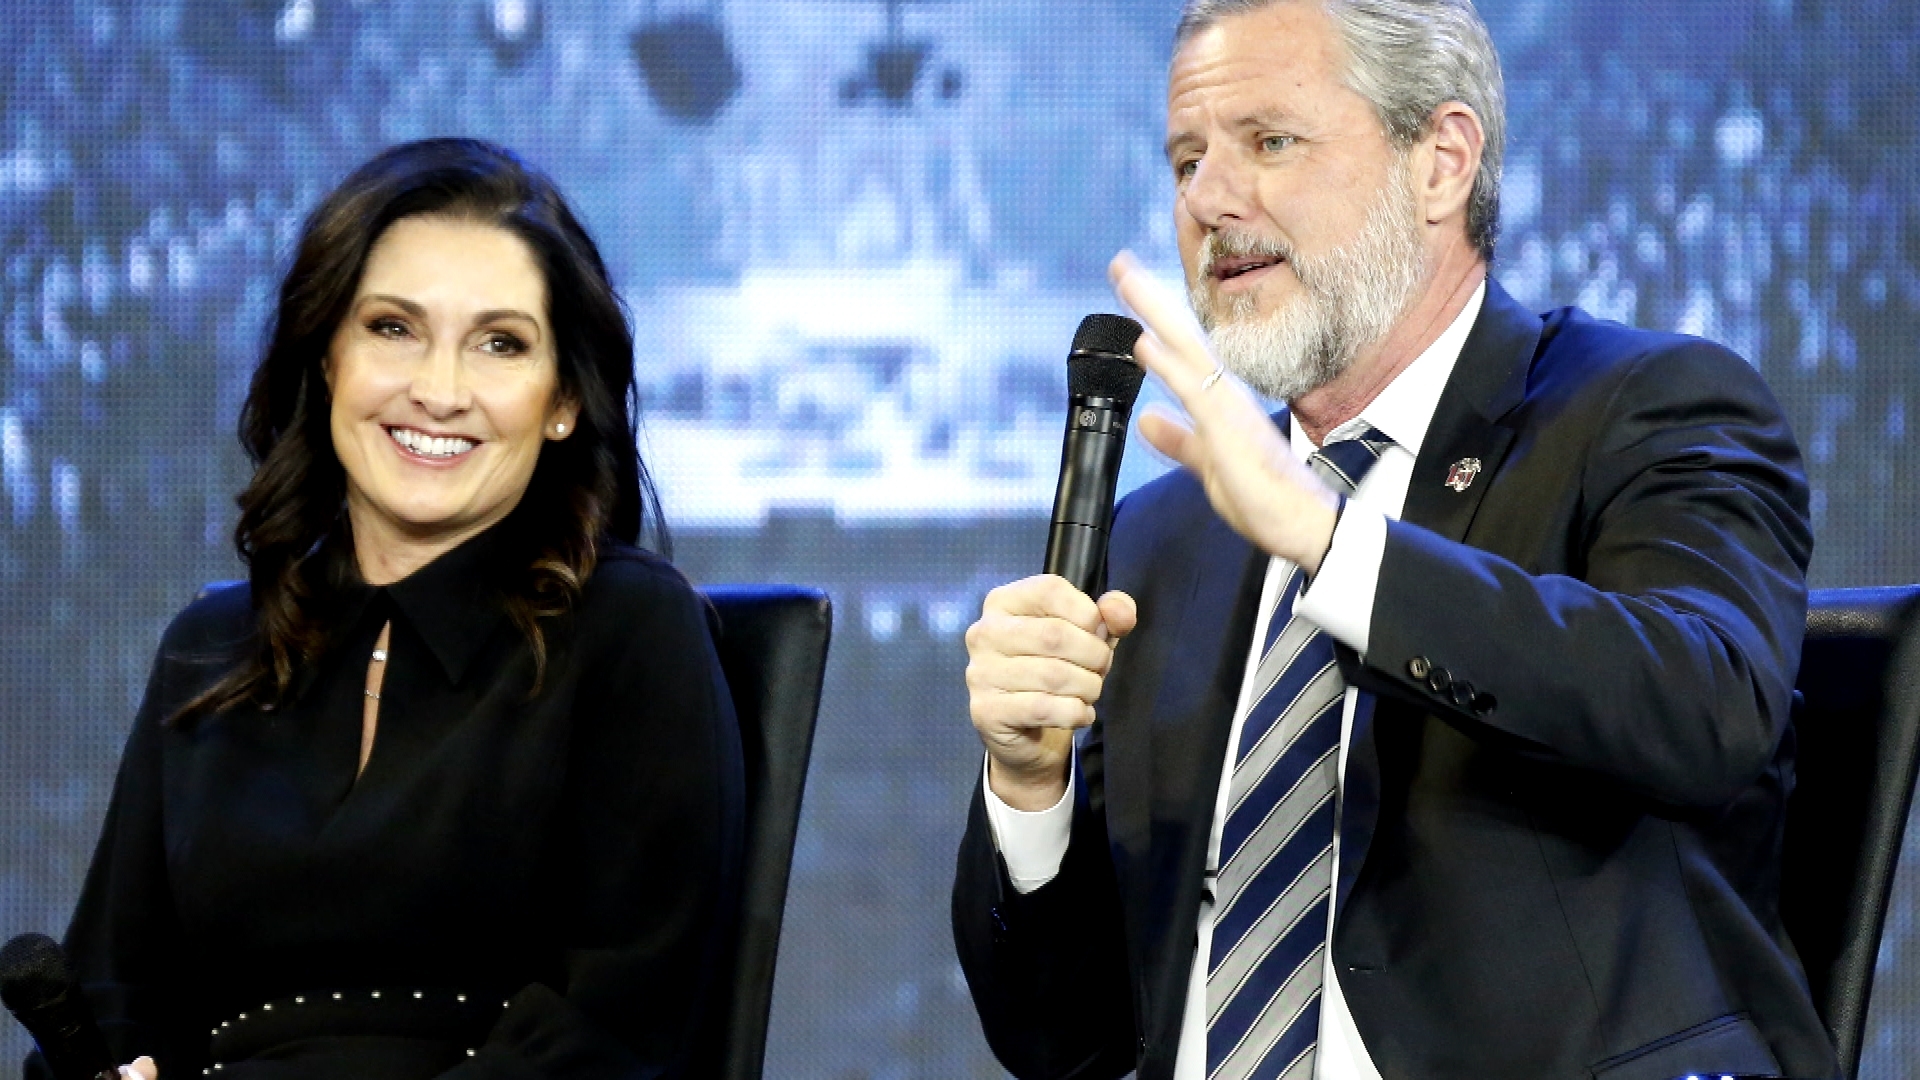 Jerry Falwell Jr.’s Wife Says She Made Sex Tapes With Pool image